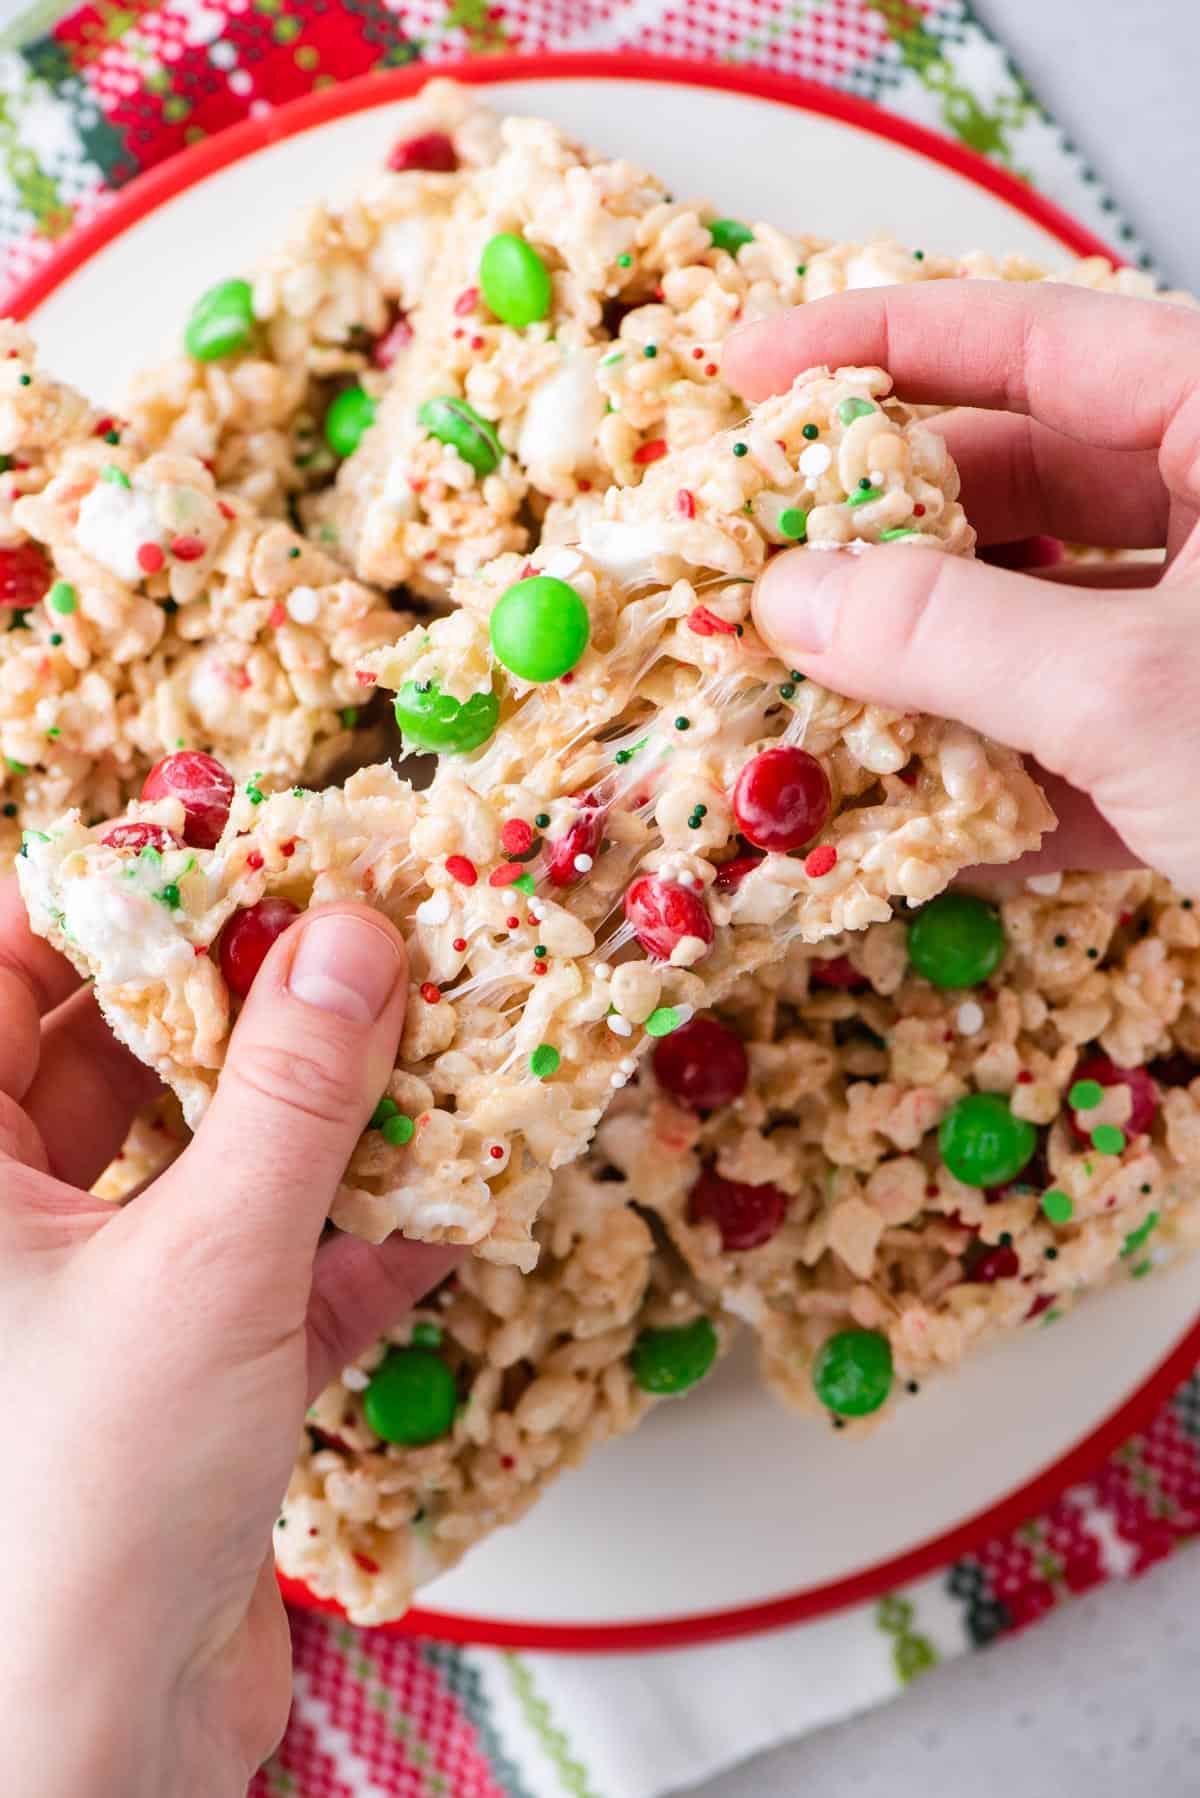 A hand grabbing two Christmas rice krispie treats from a white plate